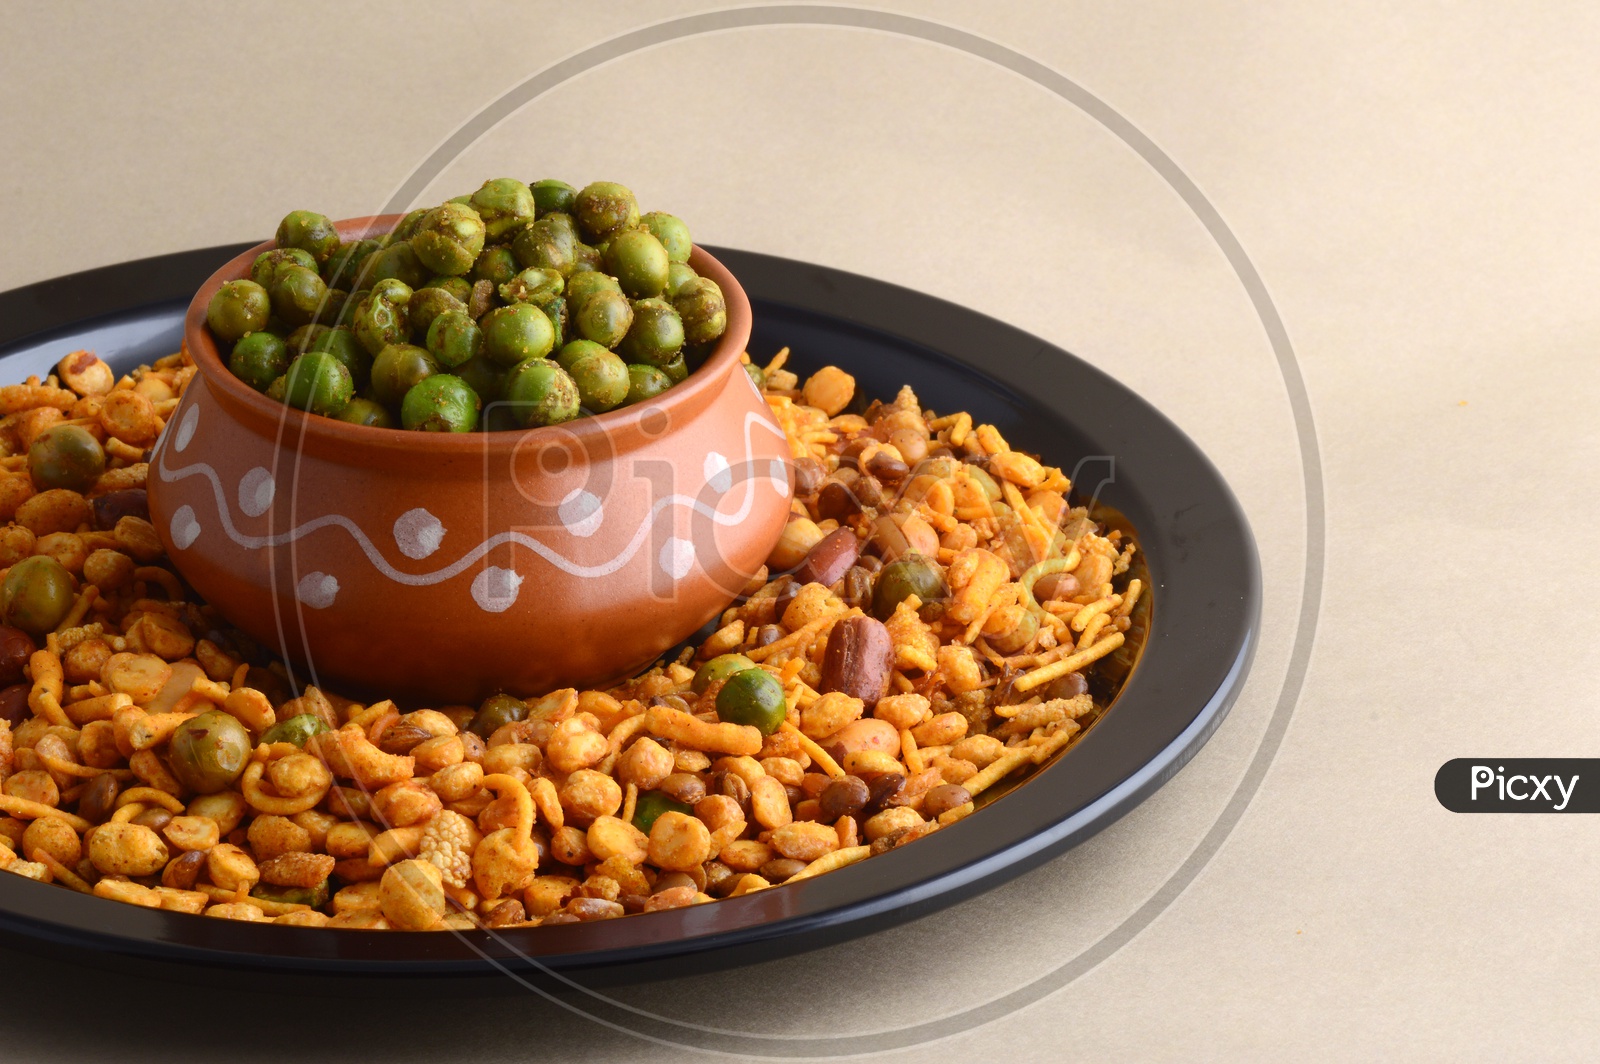 Indian Snacks, Salty Deep Fried Chivda or Mixture  Along With Fried Salty Green Peas in a Clay Pot   on an Isolated Background